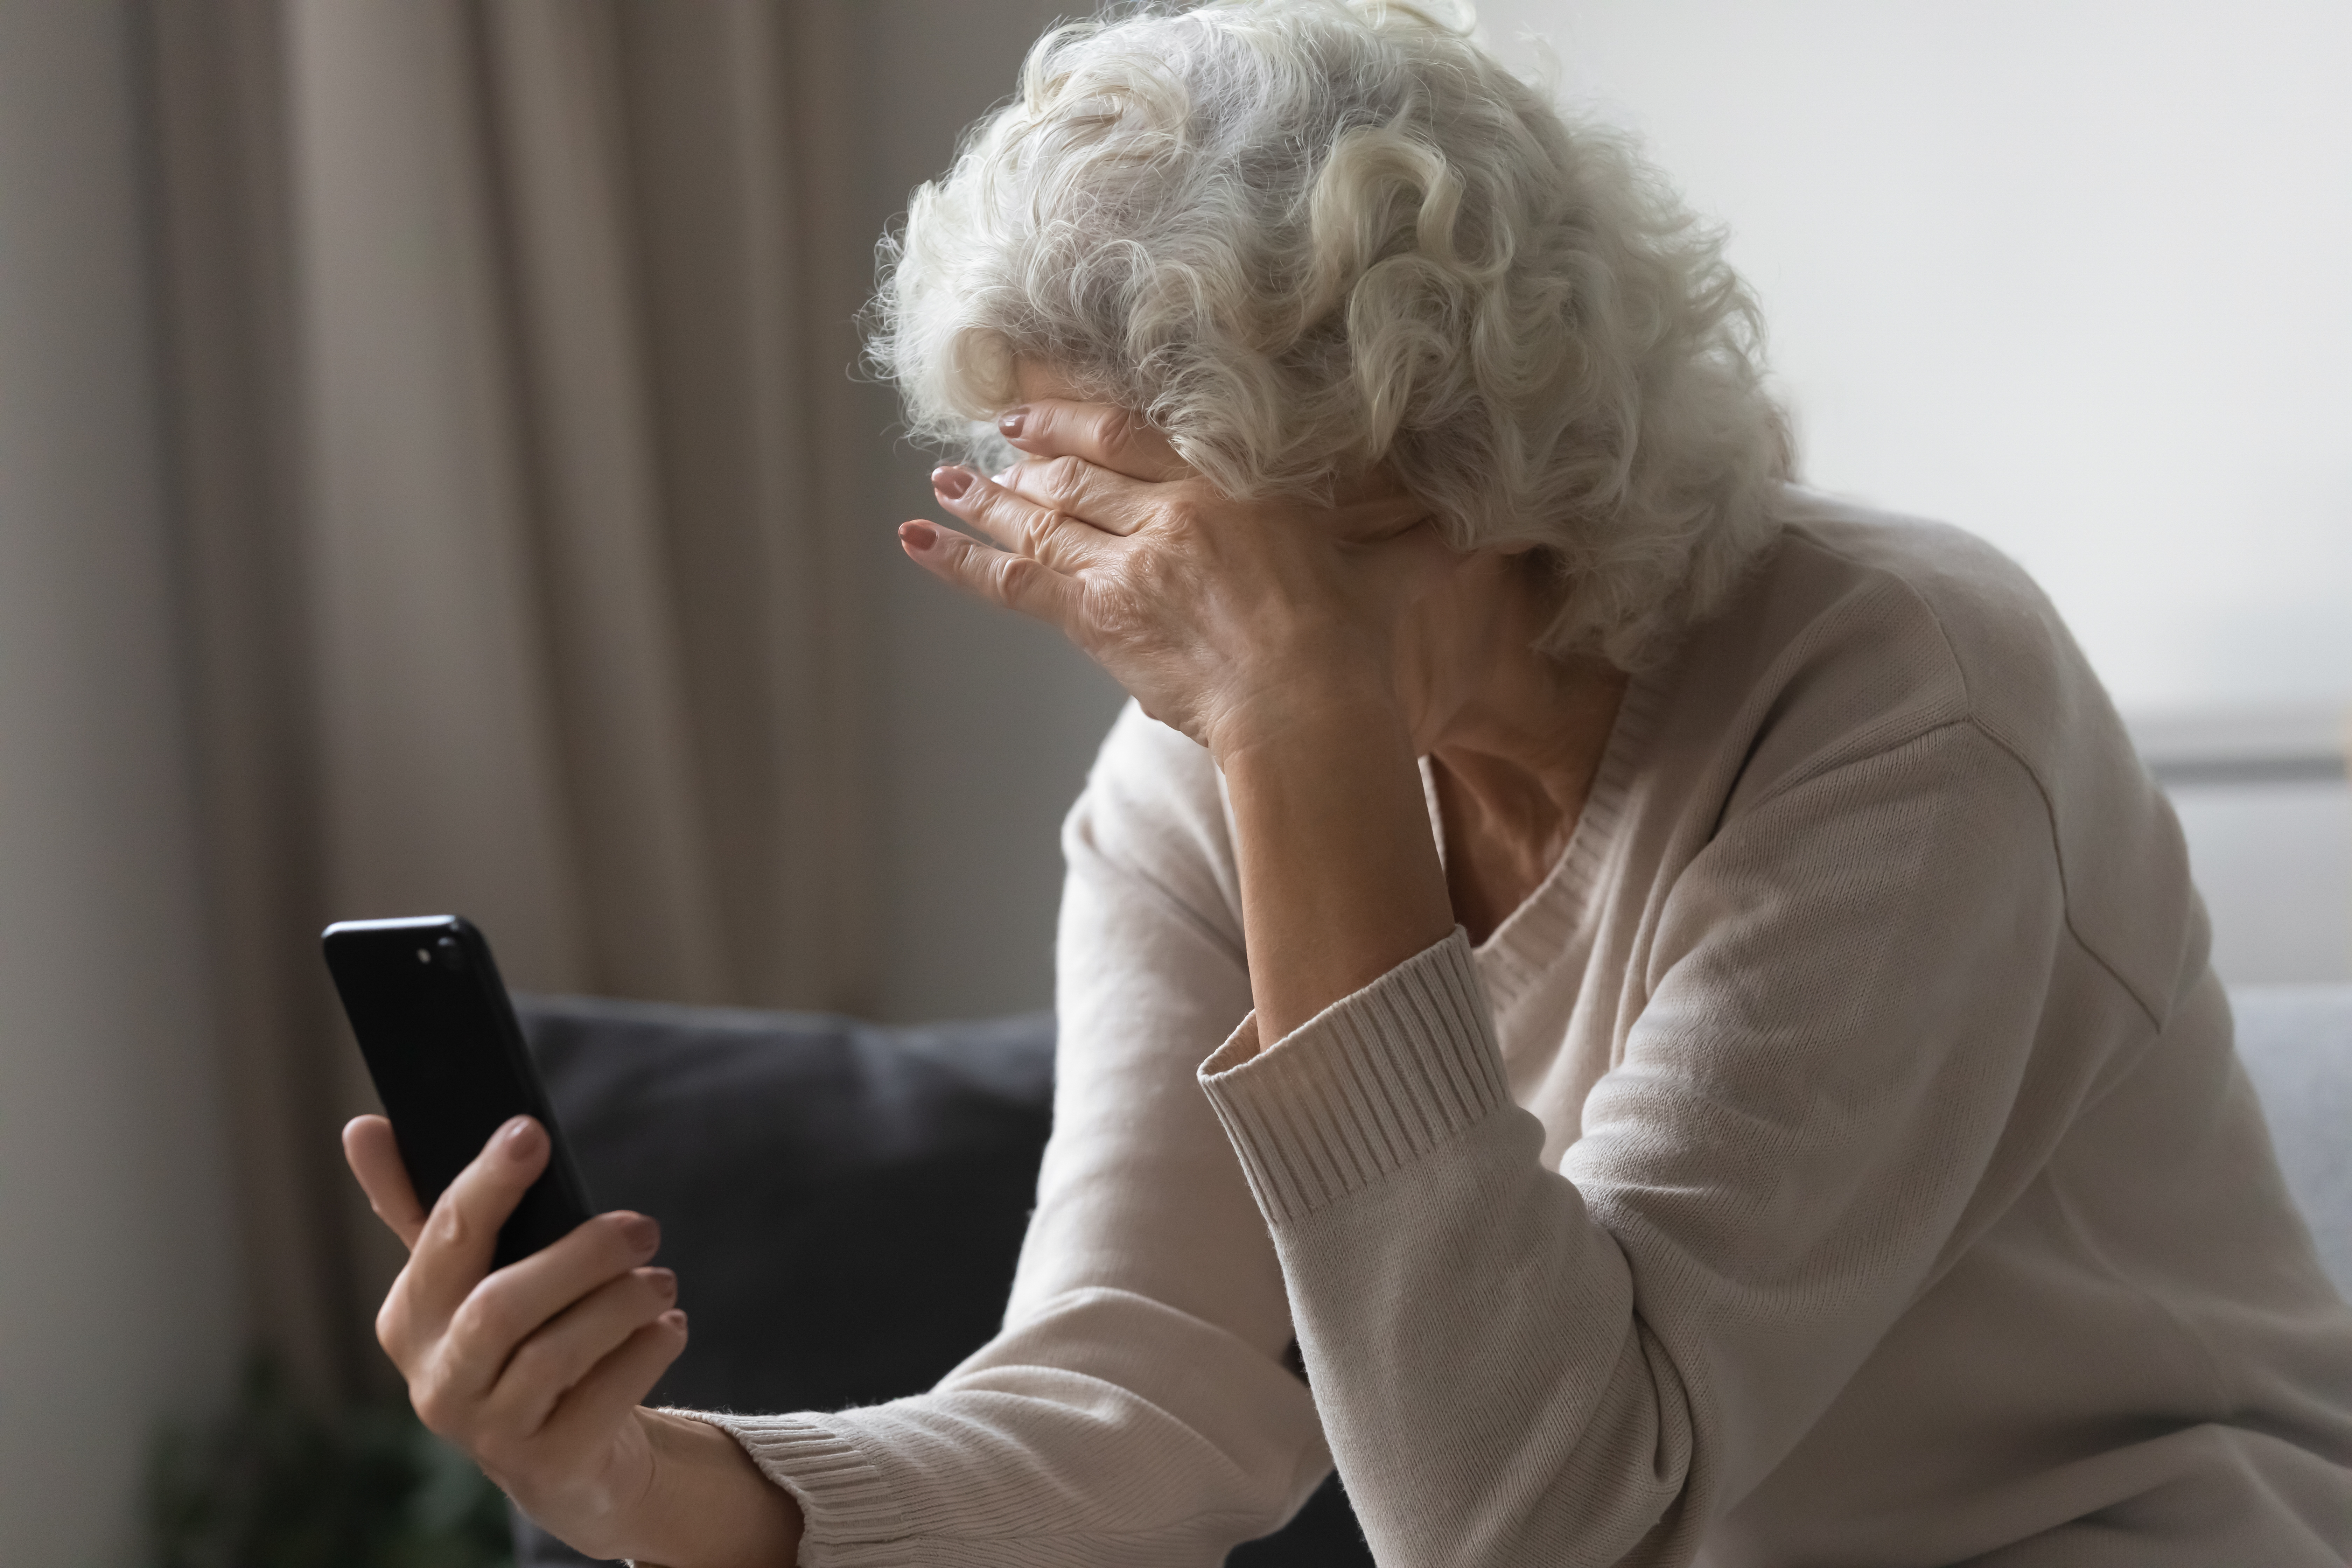 An older woman looks concerned while holding a cell | Source: Shutterstock